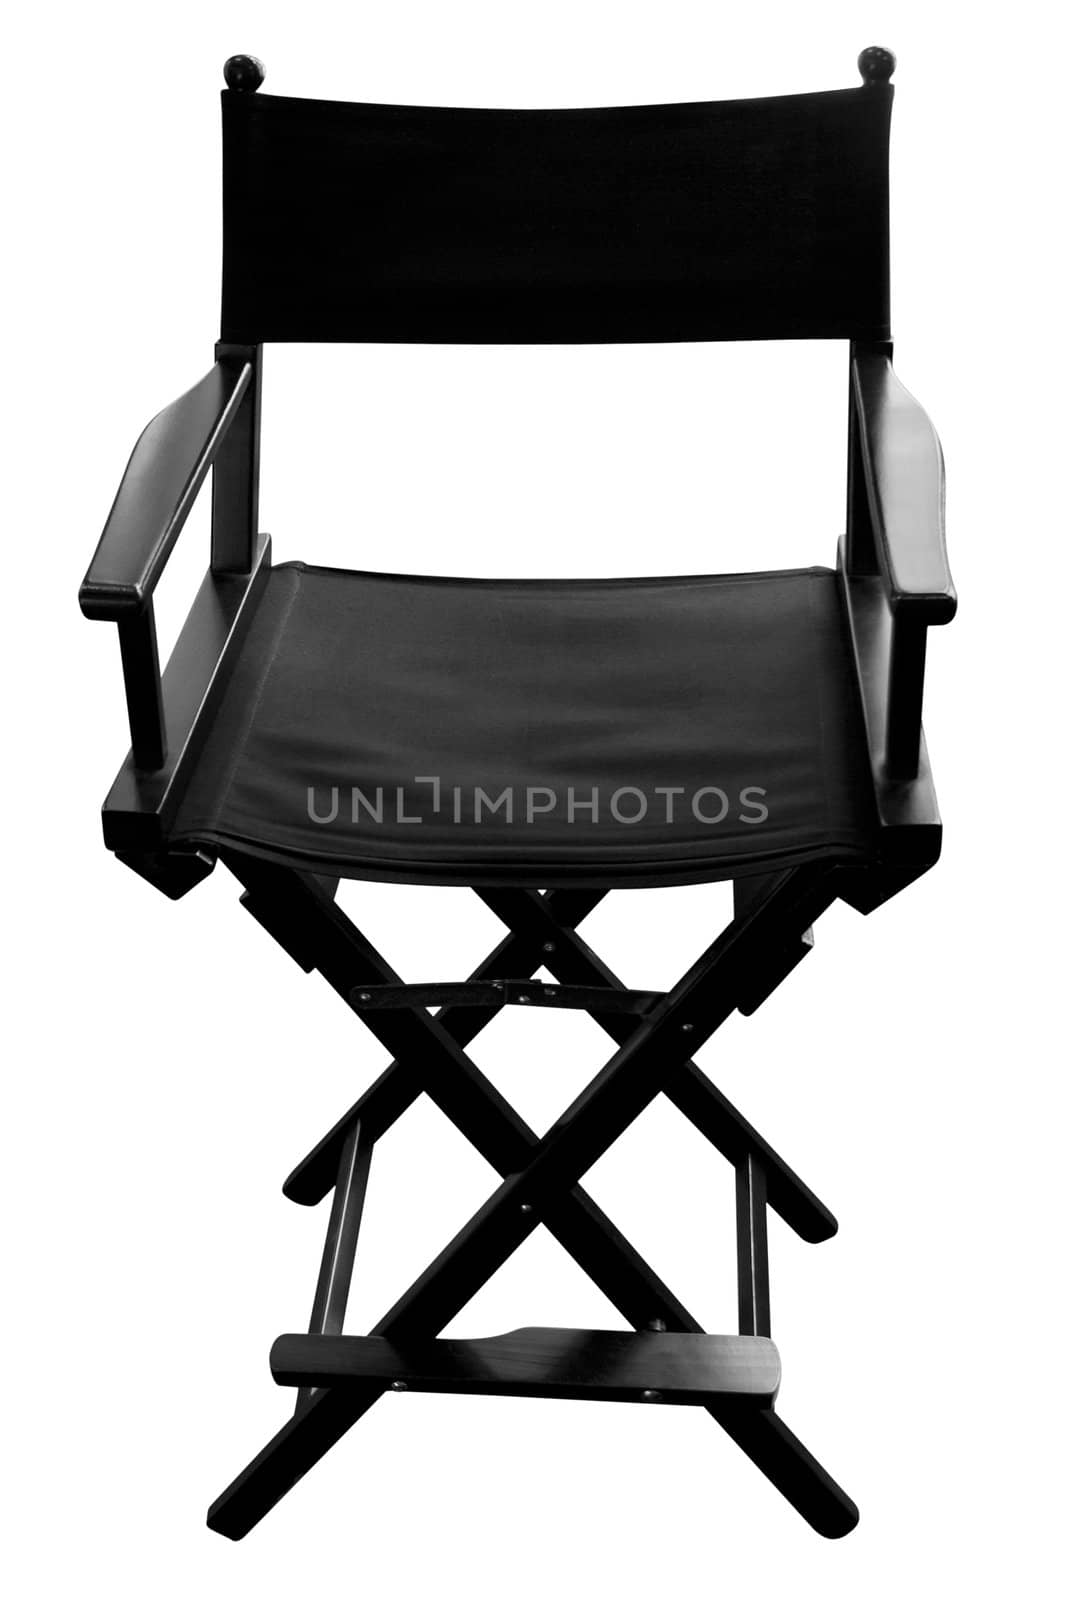 Directors chair isolated on a white background.